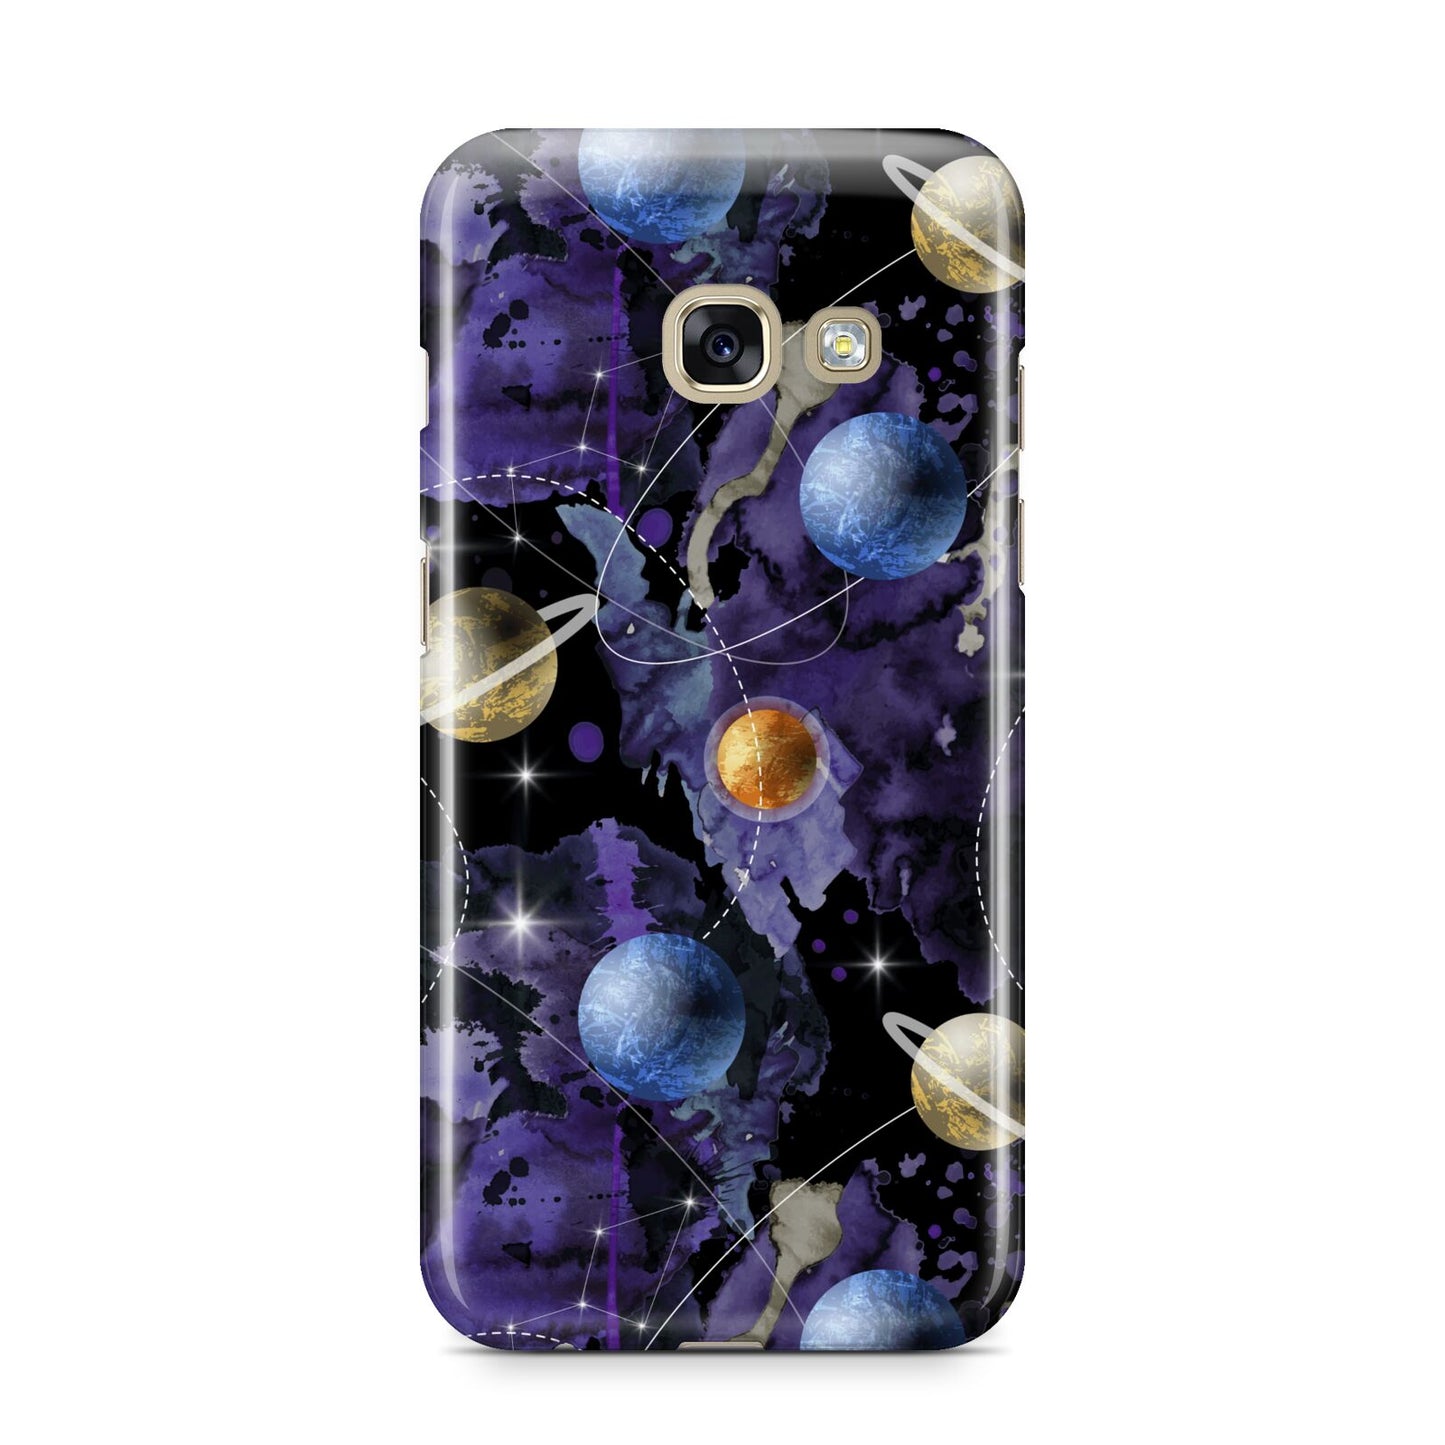 Planet Samsung Galaxy A3 2017 Case on gold phone